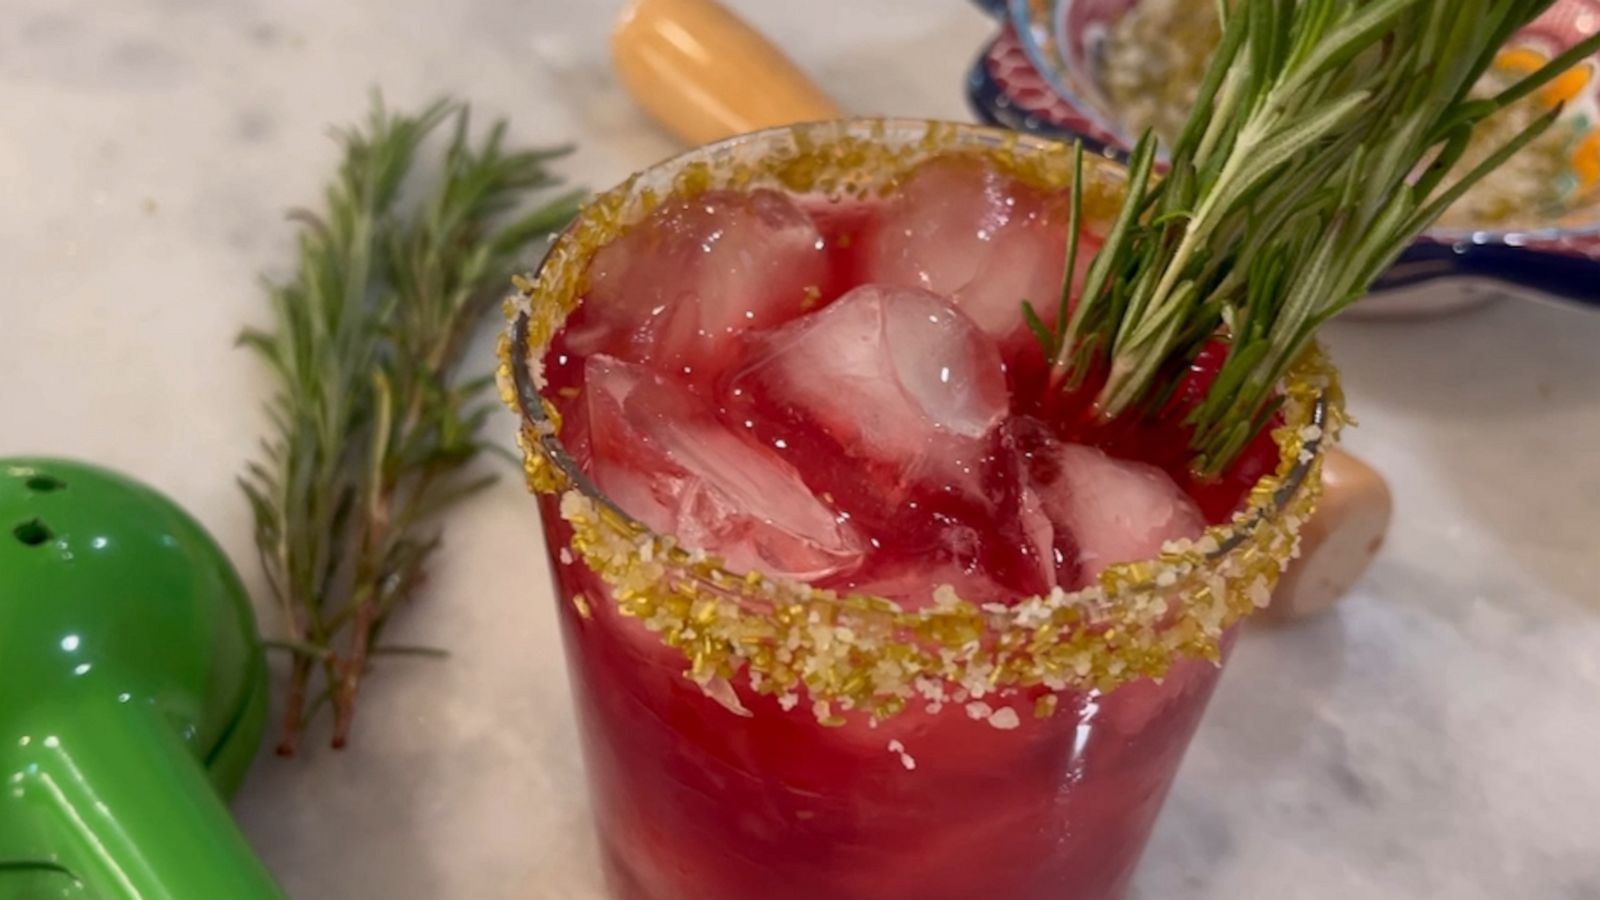 VIDEO: Whip up these spicy pomegranate margaritas for your holiday guests